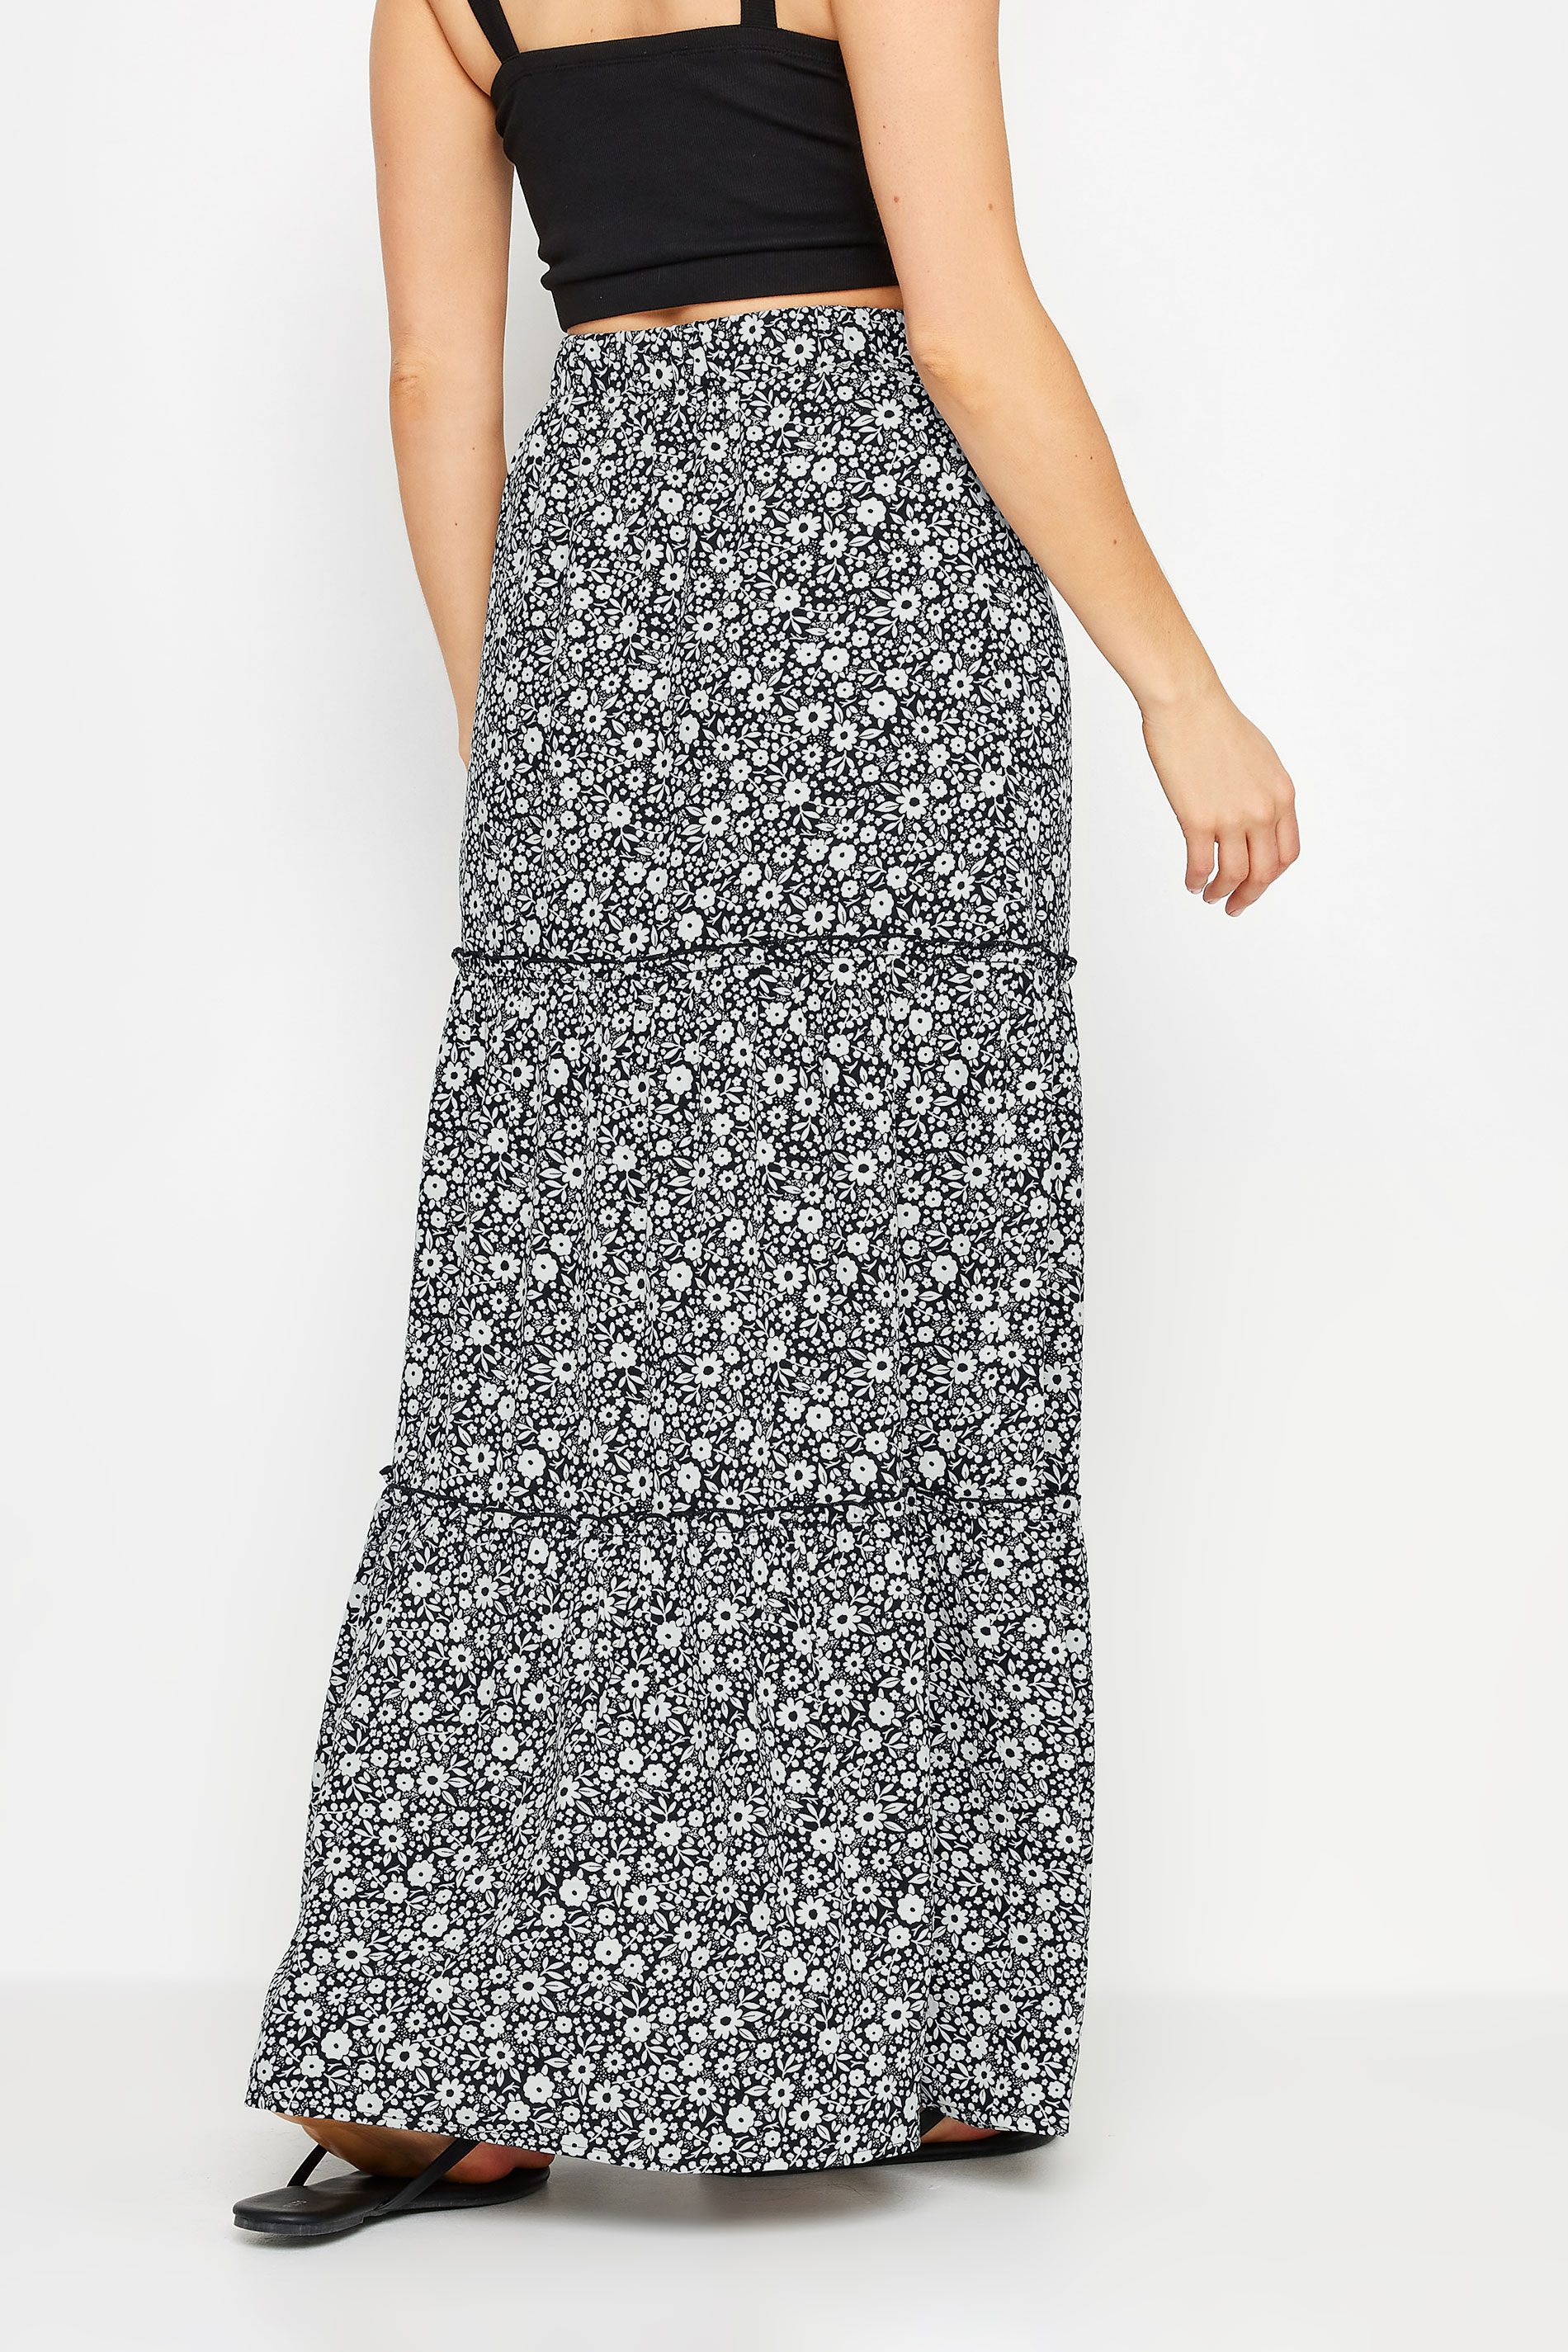 LTS Tall Women's Black & White Ditsy Floral Print Tiered Maxi Skirt | Long Tall Sally 3